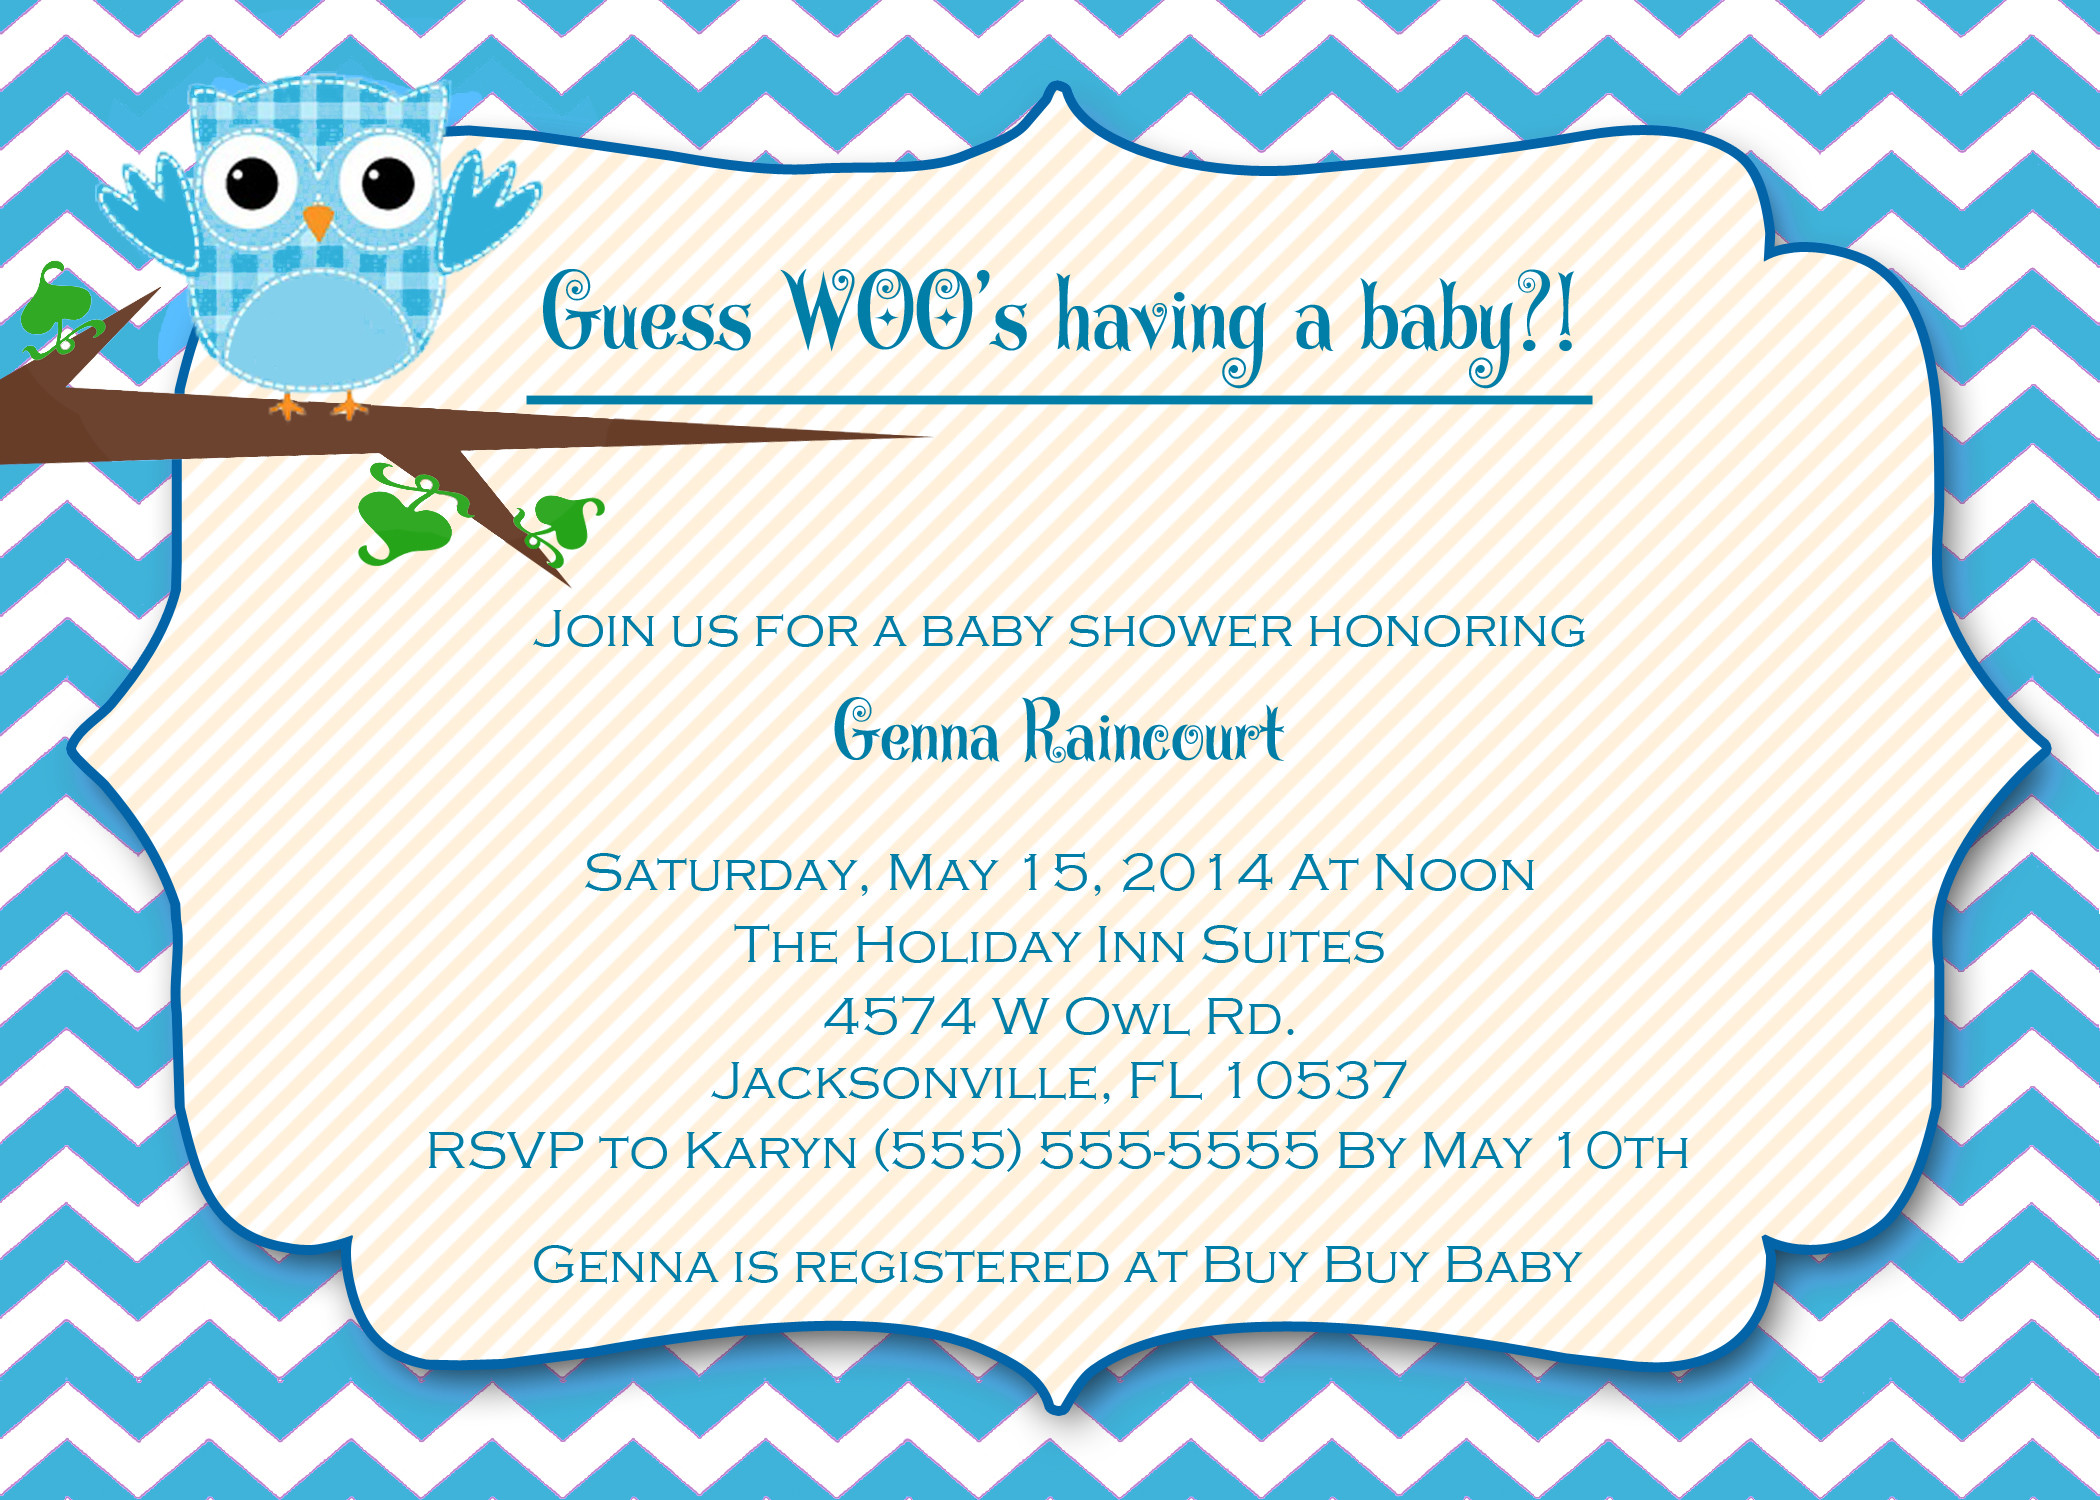 2100x1500 Funny Baby Shower Invitations 27 Background Wallpaper. Funny Baby Shower  Invitations 27 Background Wallpaper